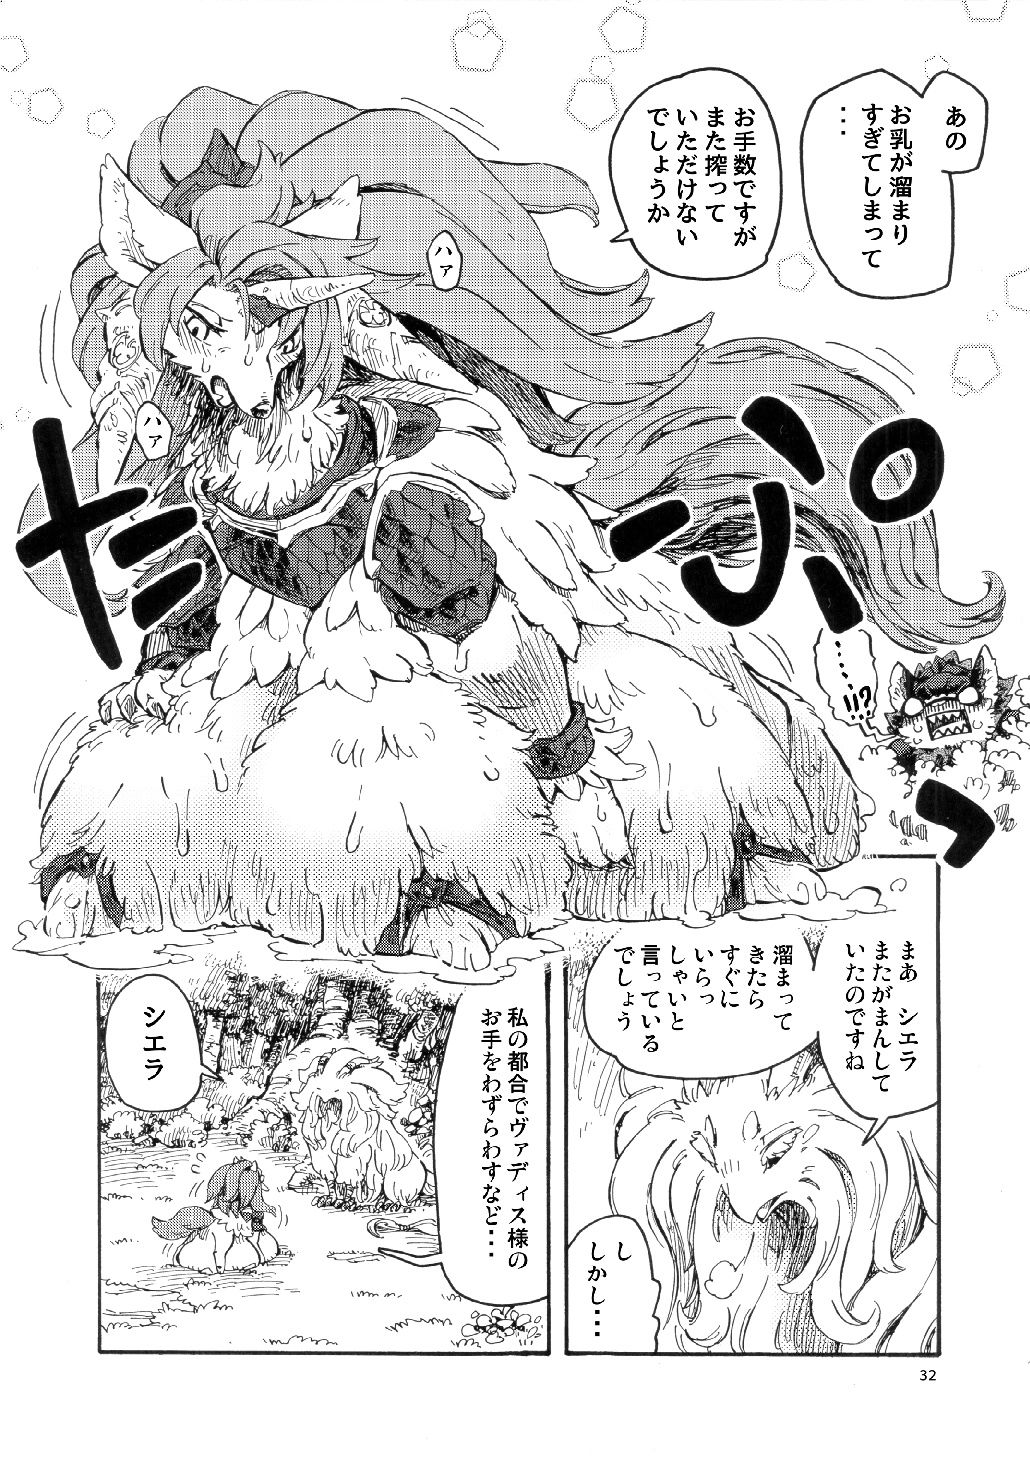 [BLUE MaRL (Kuromame)] Legend of the Sacred Dog - LET'S OVER MORPHING [BLUE MaRL (クロマメ)] 聖犬伝説 LET'S OVER MORPHING